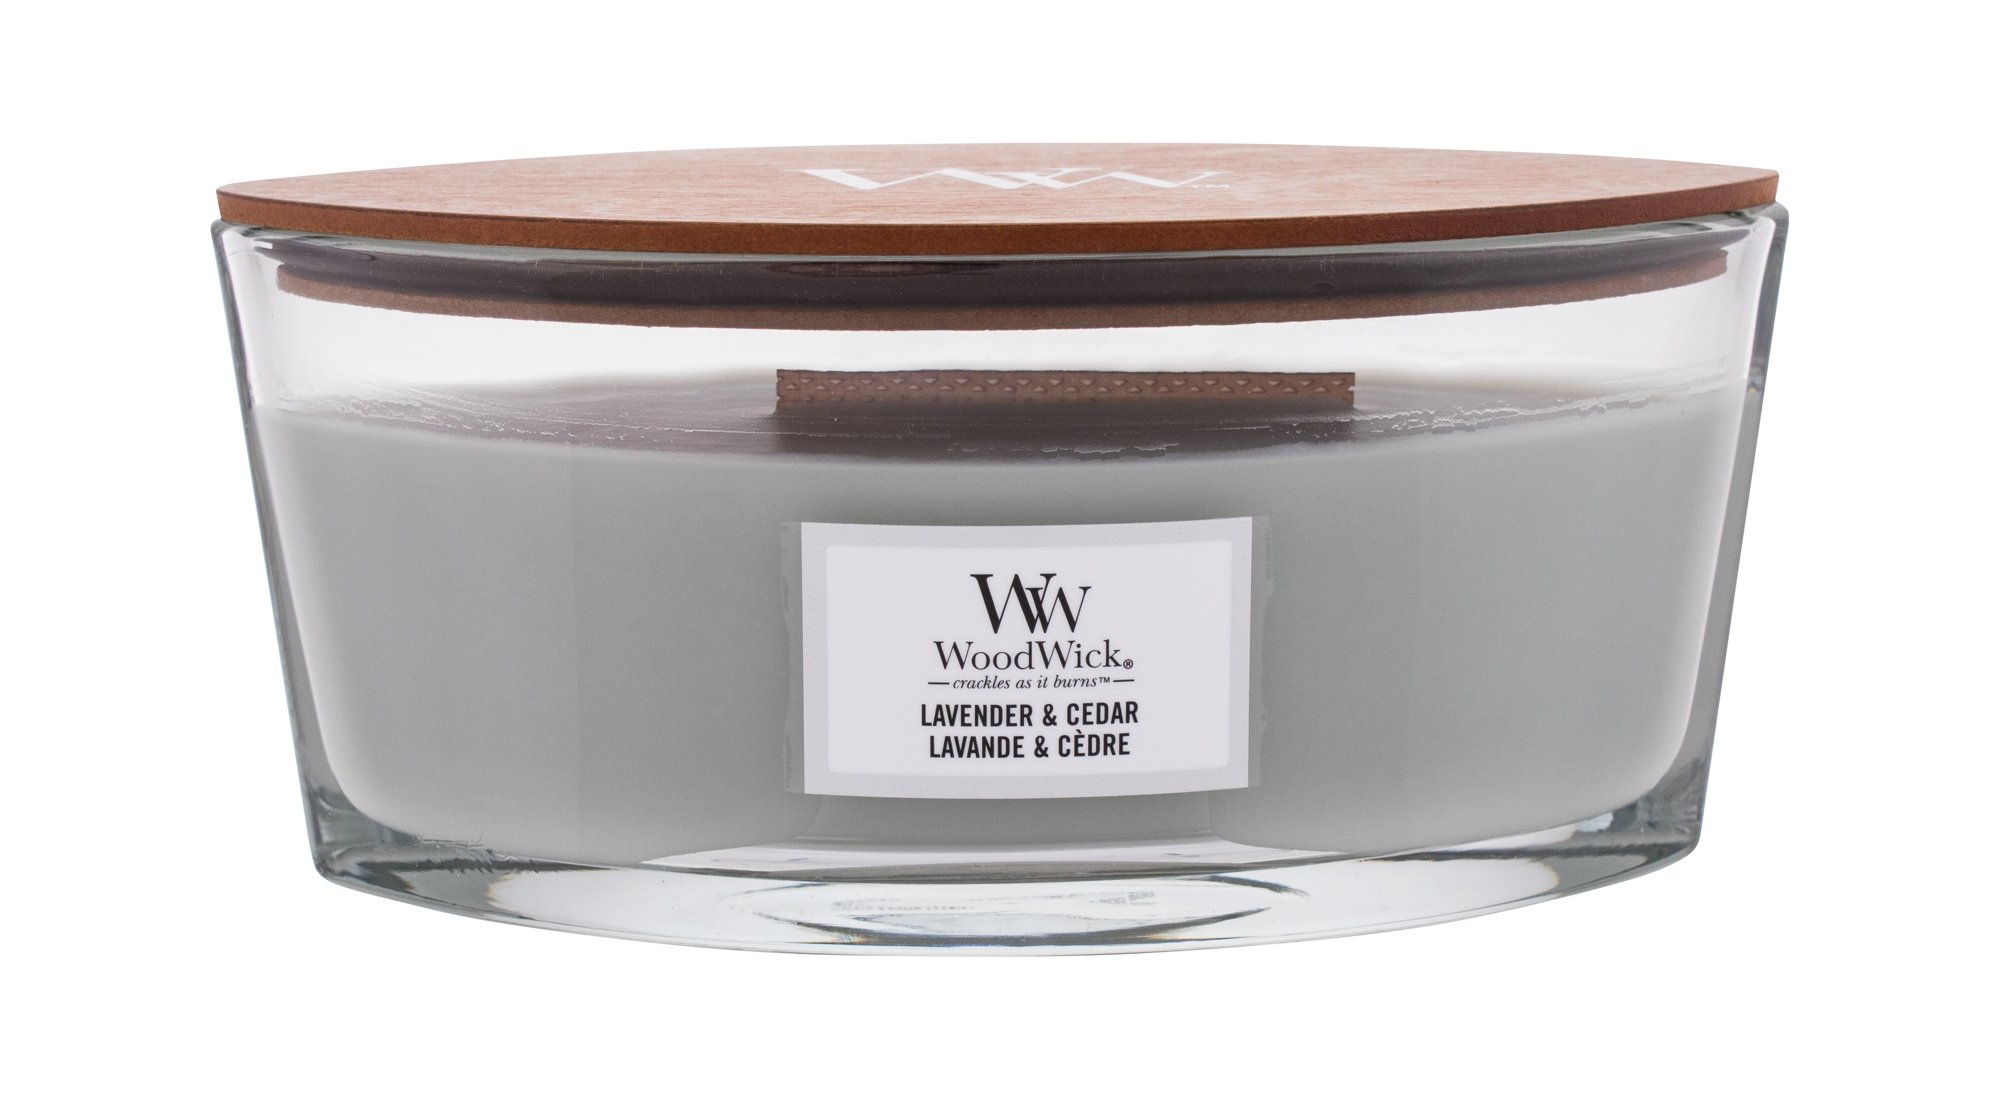 WoodWick Lavender & Cedar 453,6g Kvepalai Unisex Scented Candle